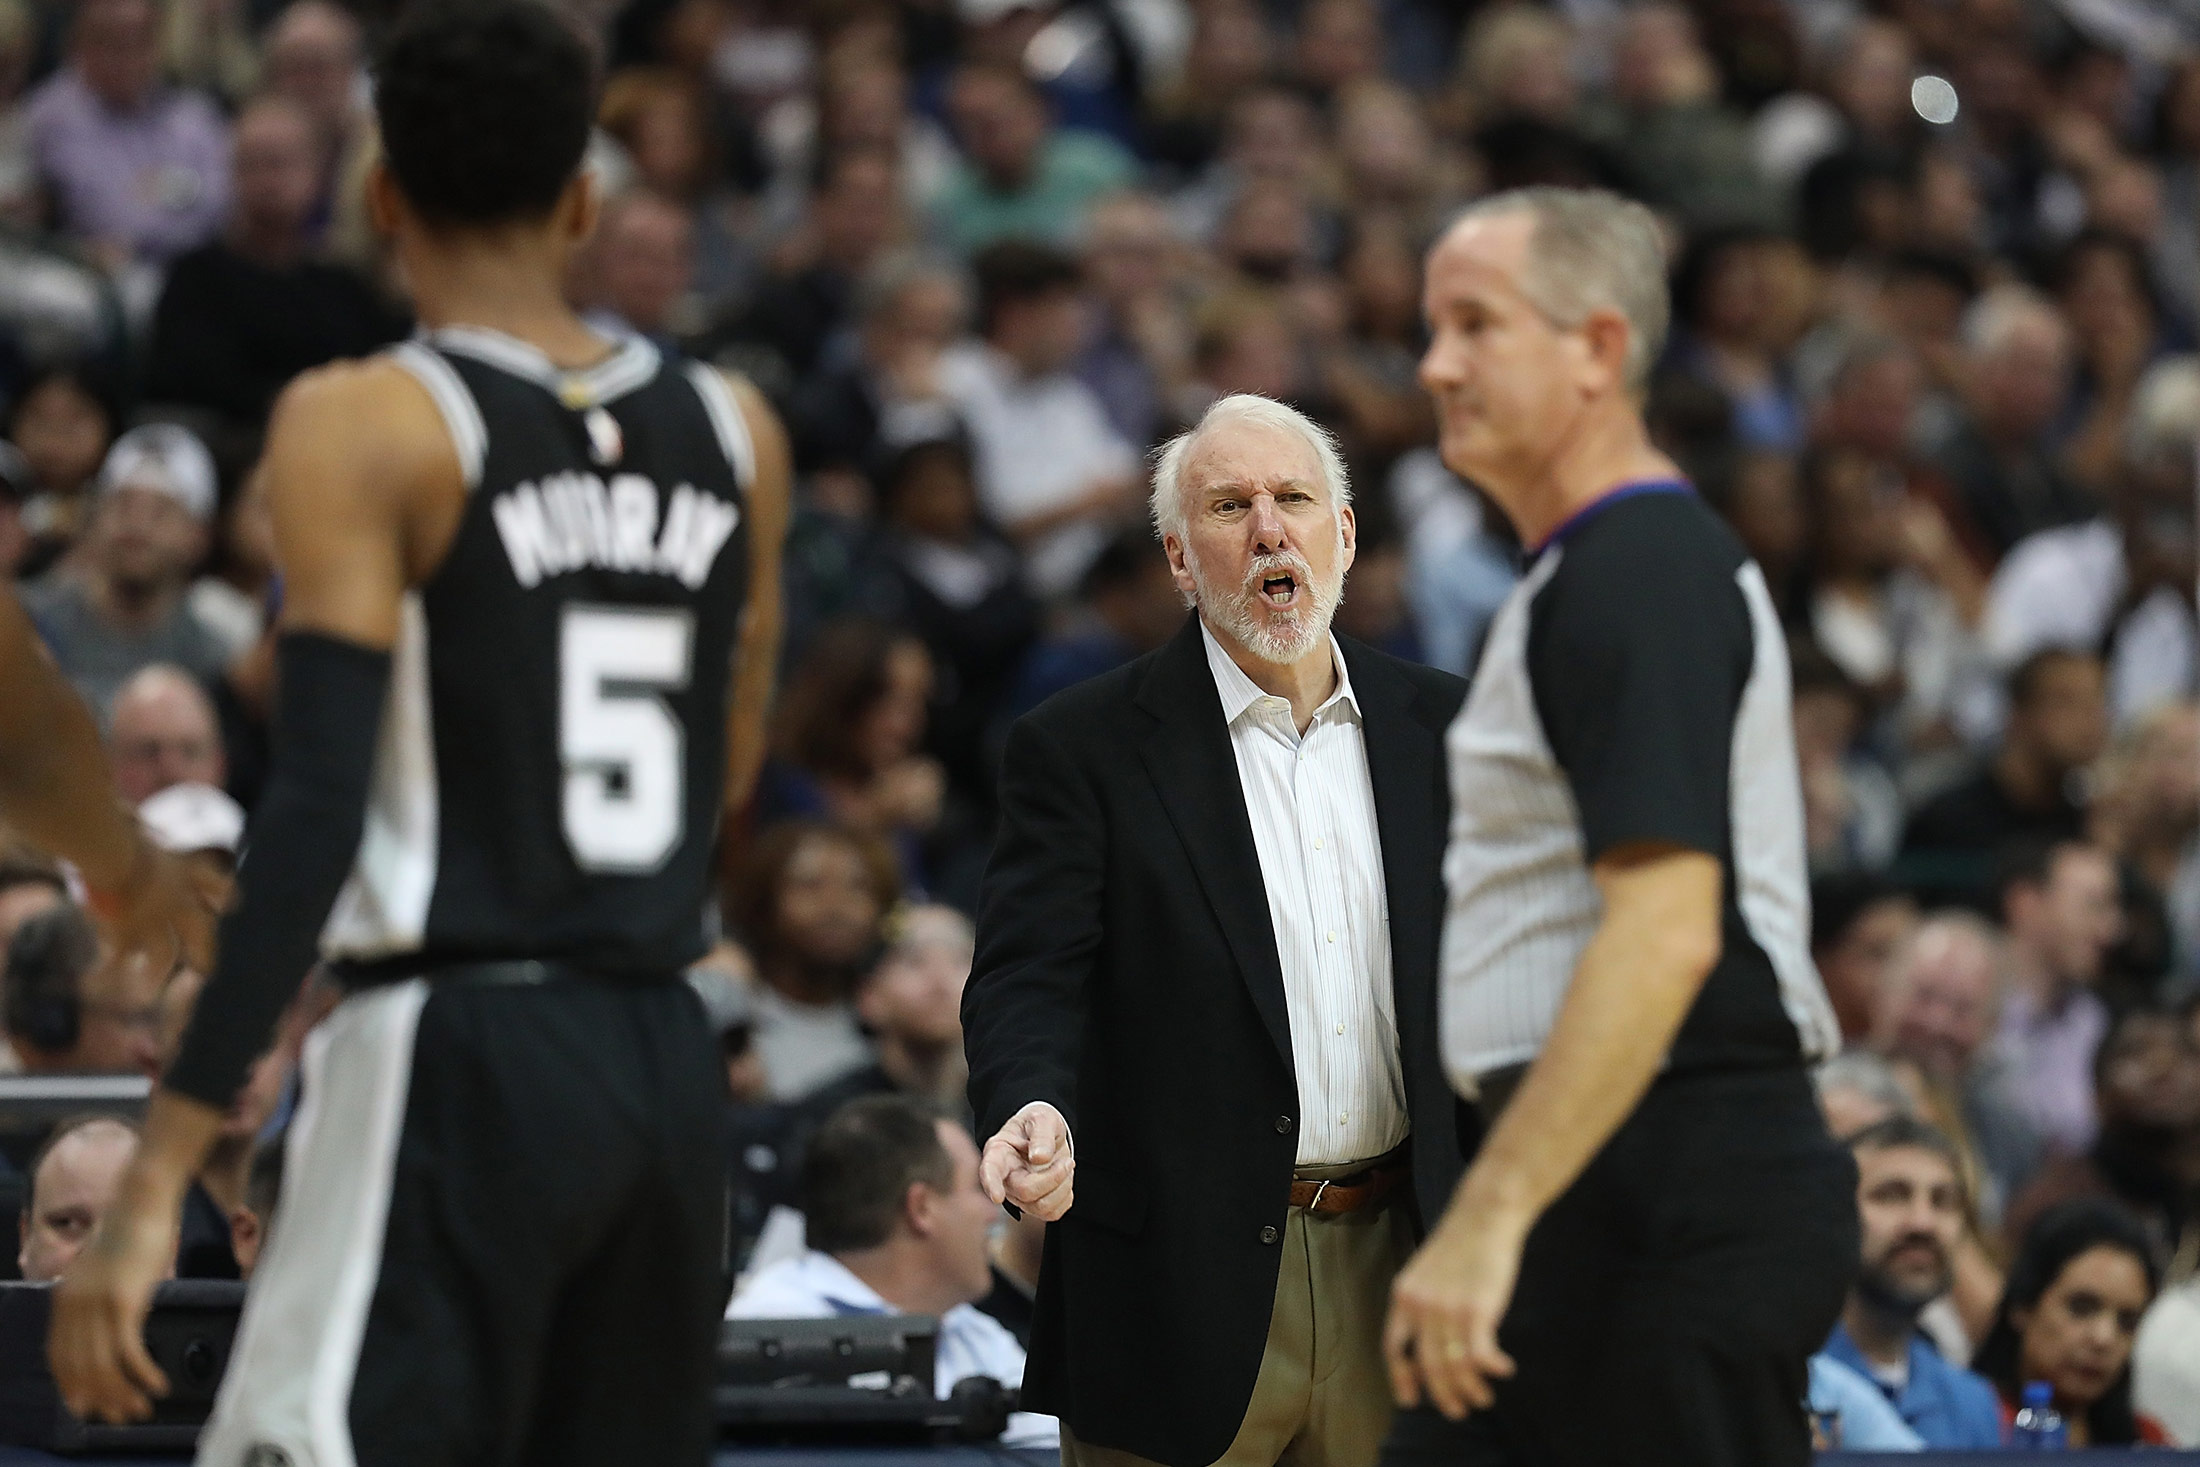 How Gregg Popovich tweaked his coaching style to fit Kawhi Leonard's  nonverbal approach - Basketball Network - Your daily dose of basketball